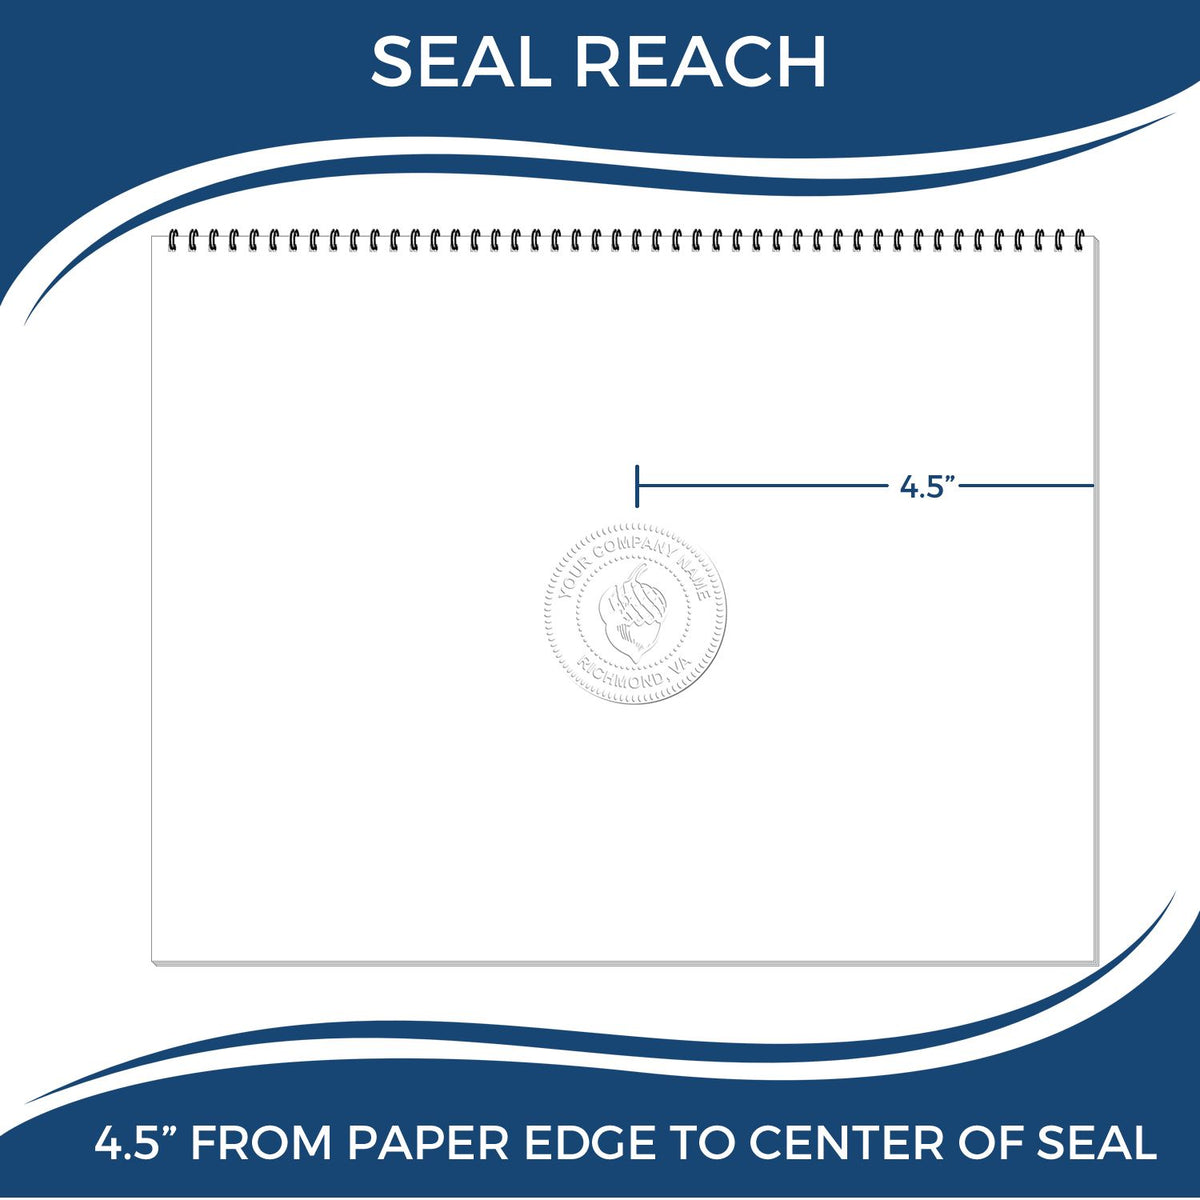 An infographic showing the seal reach which is represented by a ruler and a miniature seal image of the State of Louisiana Extended Long Reach Engineer Seal